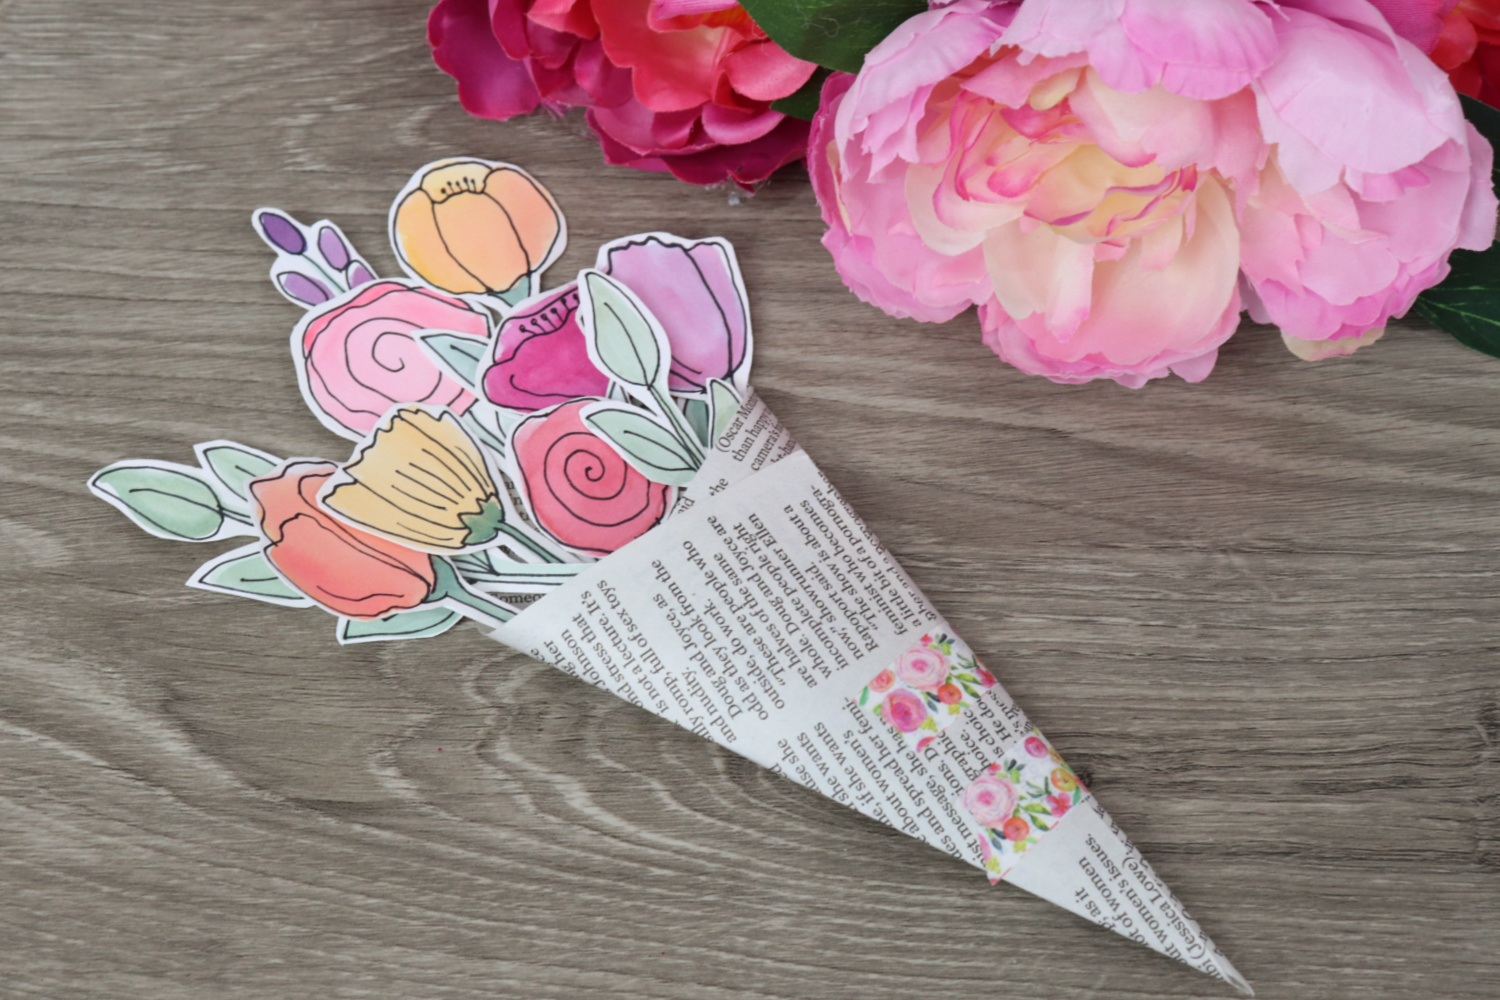 Image contains a bouquet of watercolor flowers wrapped in a newspaper clipping sitting on a wooden desk near a few pink faux flowers.